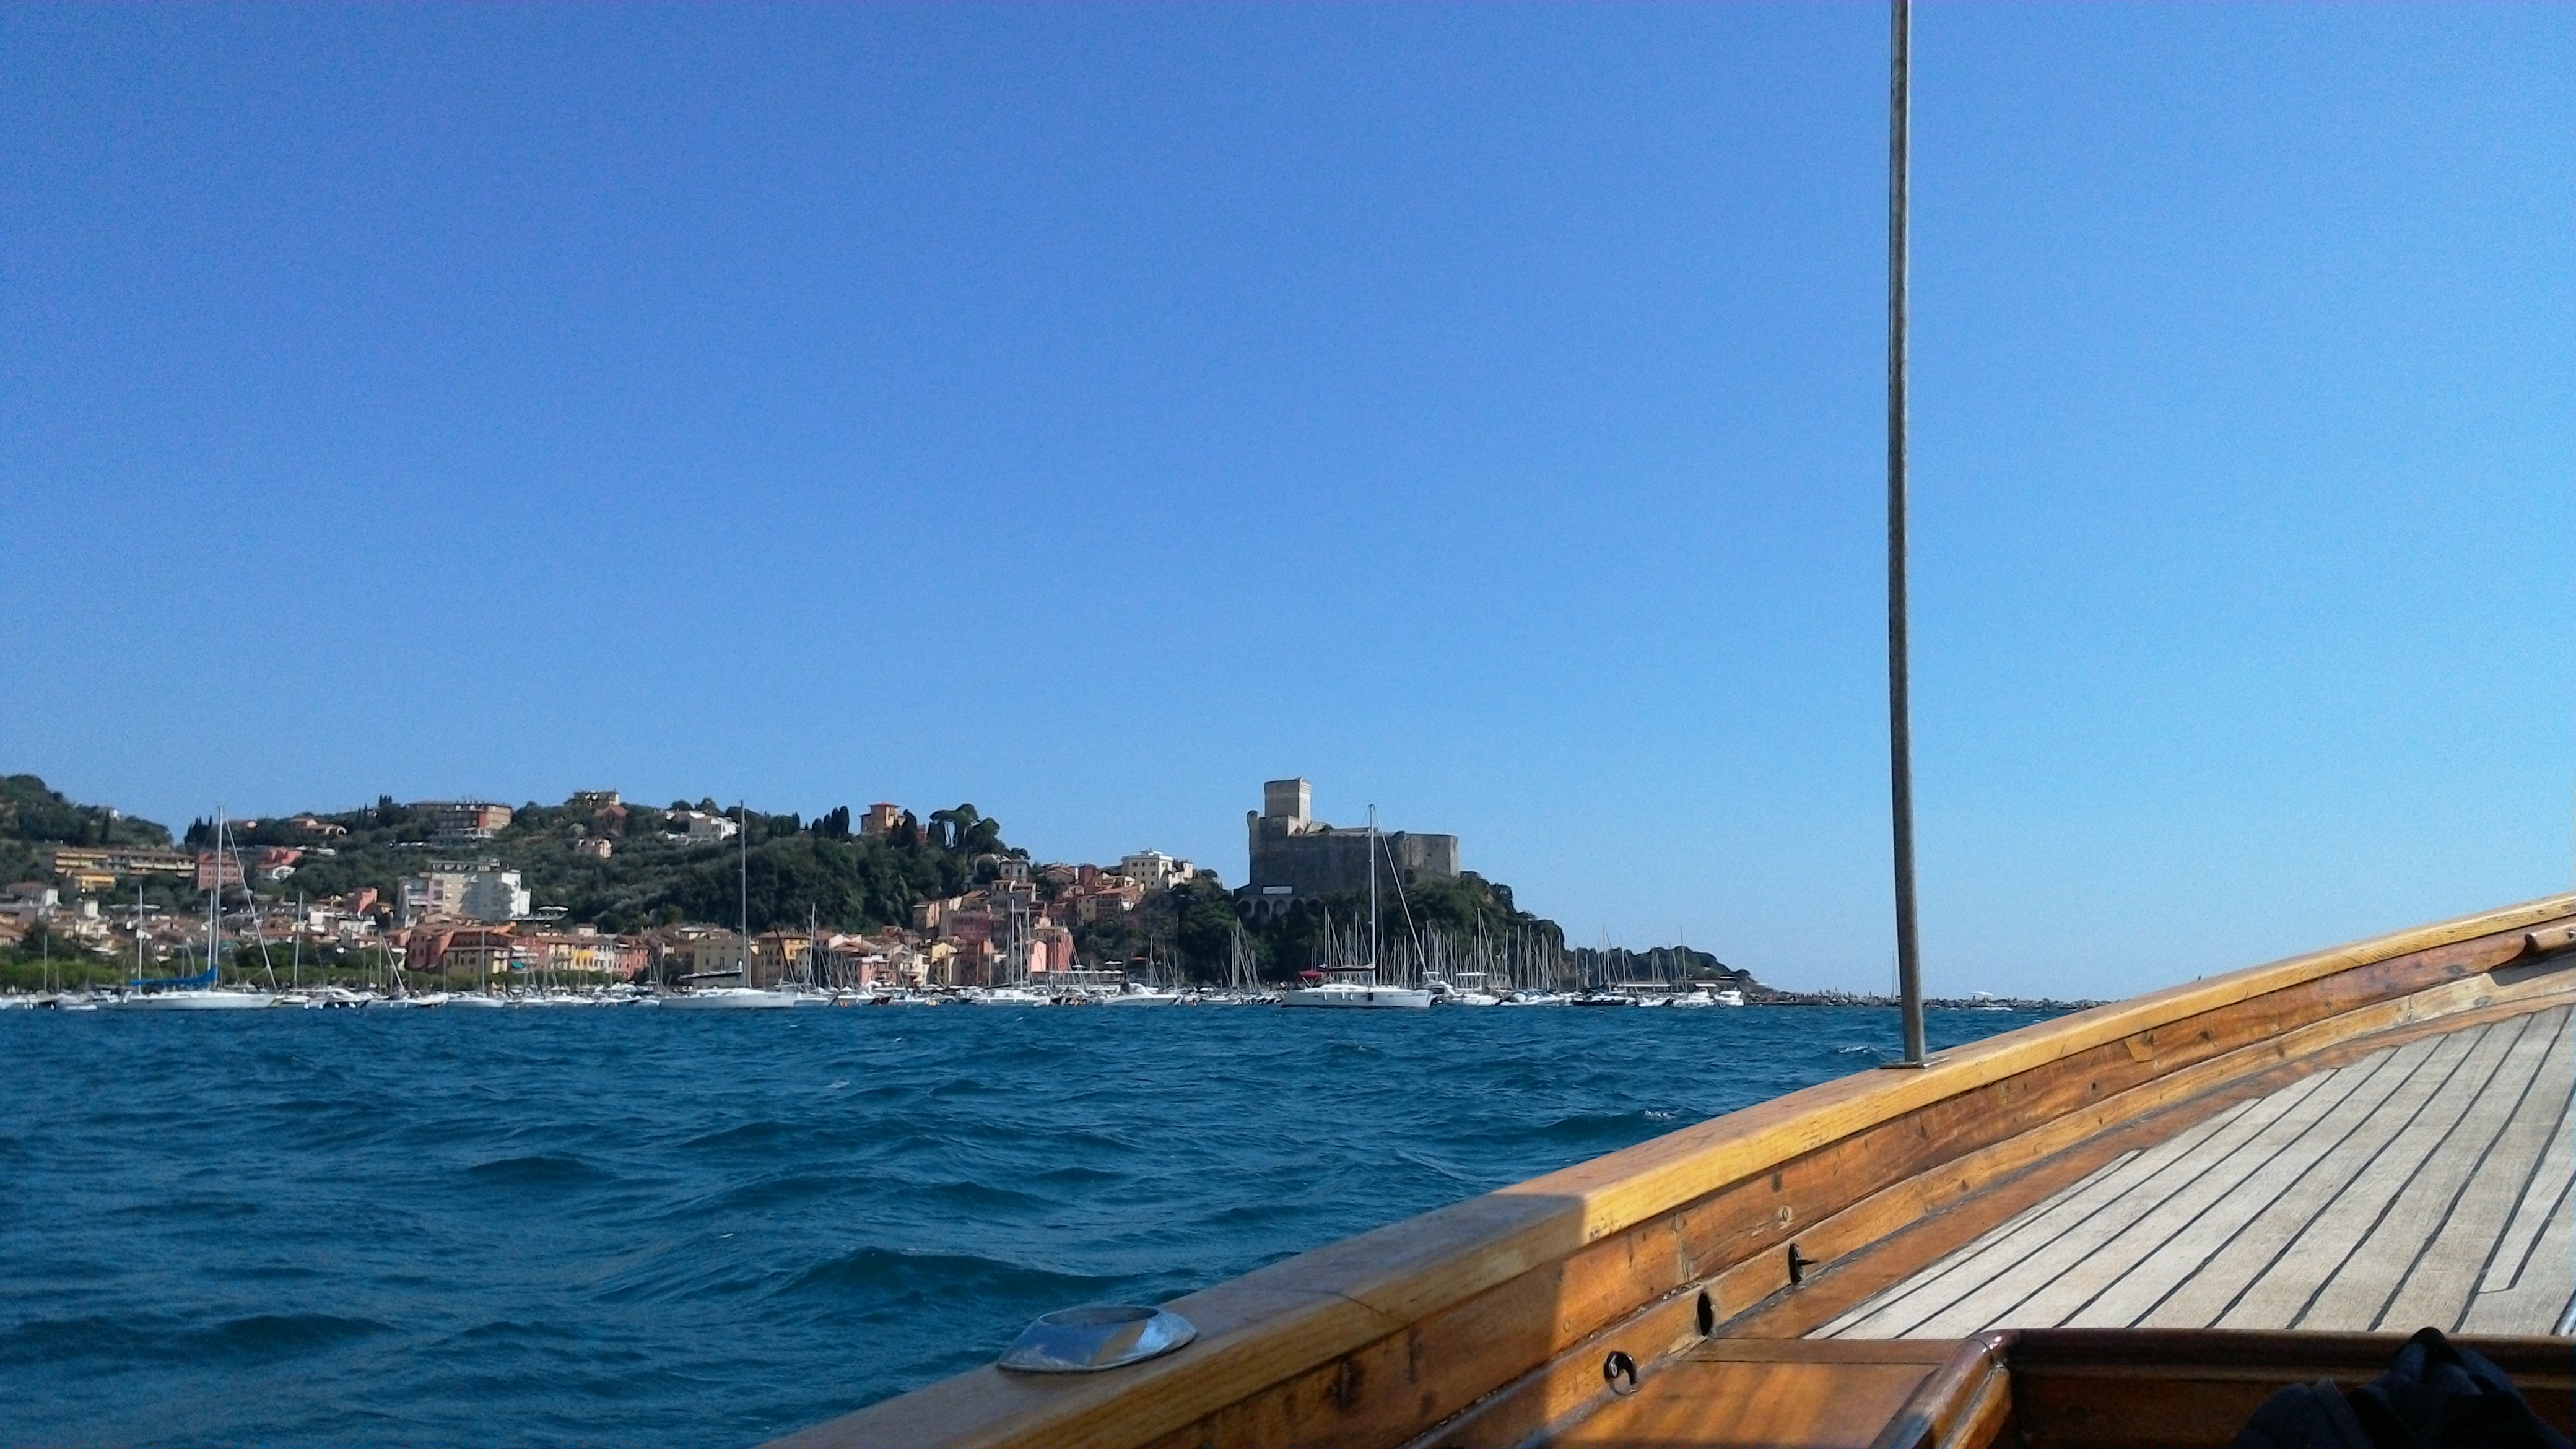 There is also the possibility to do a boat trip. At disposal there is a typical "Gozzo ligure" wooden made to explore all the Gulf in its beauty